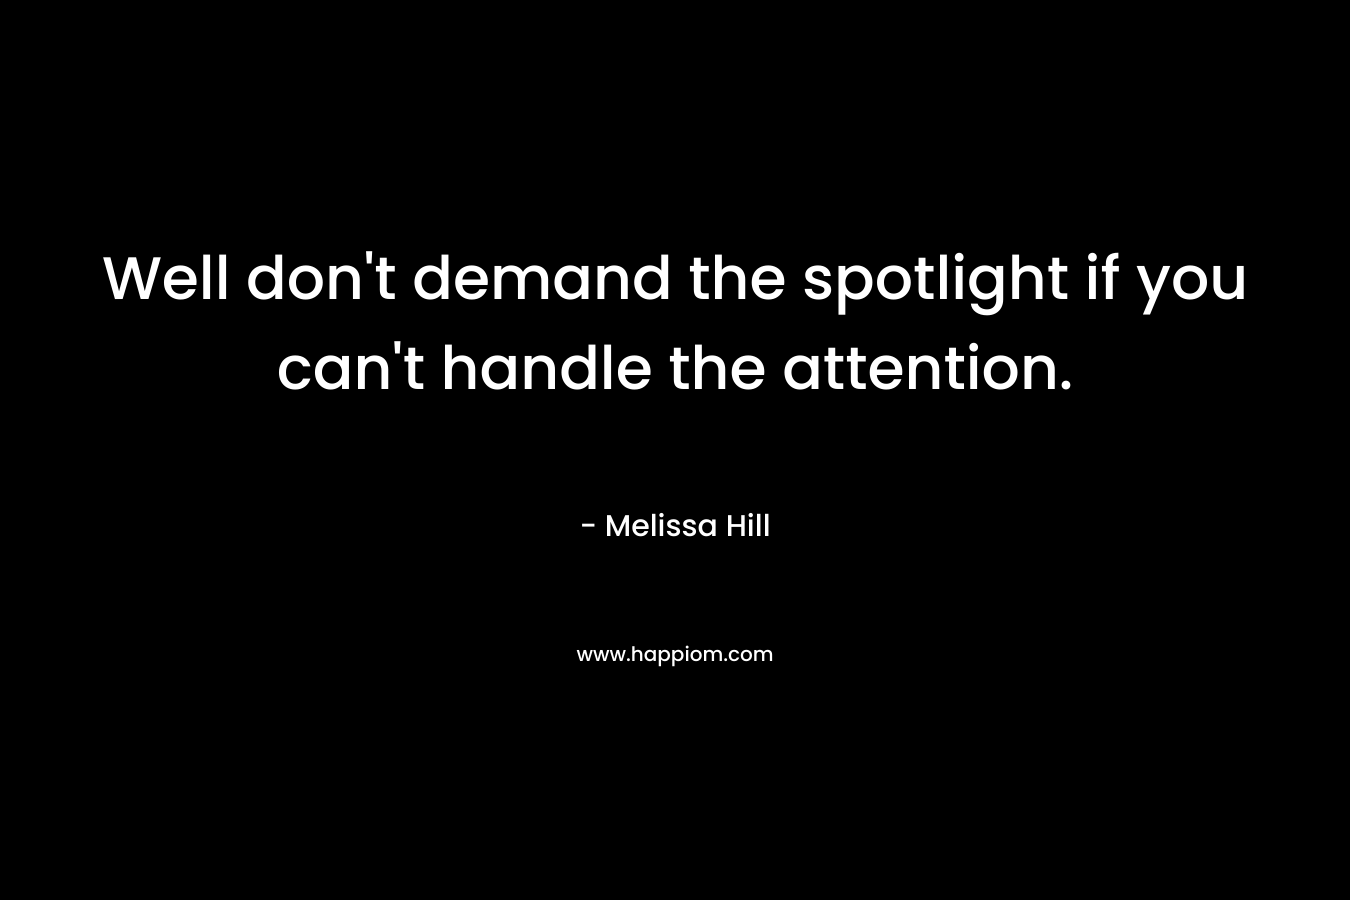 Well don’t demand the spotlight if you can’t handle the attention. – Melissa Hill